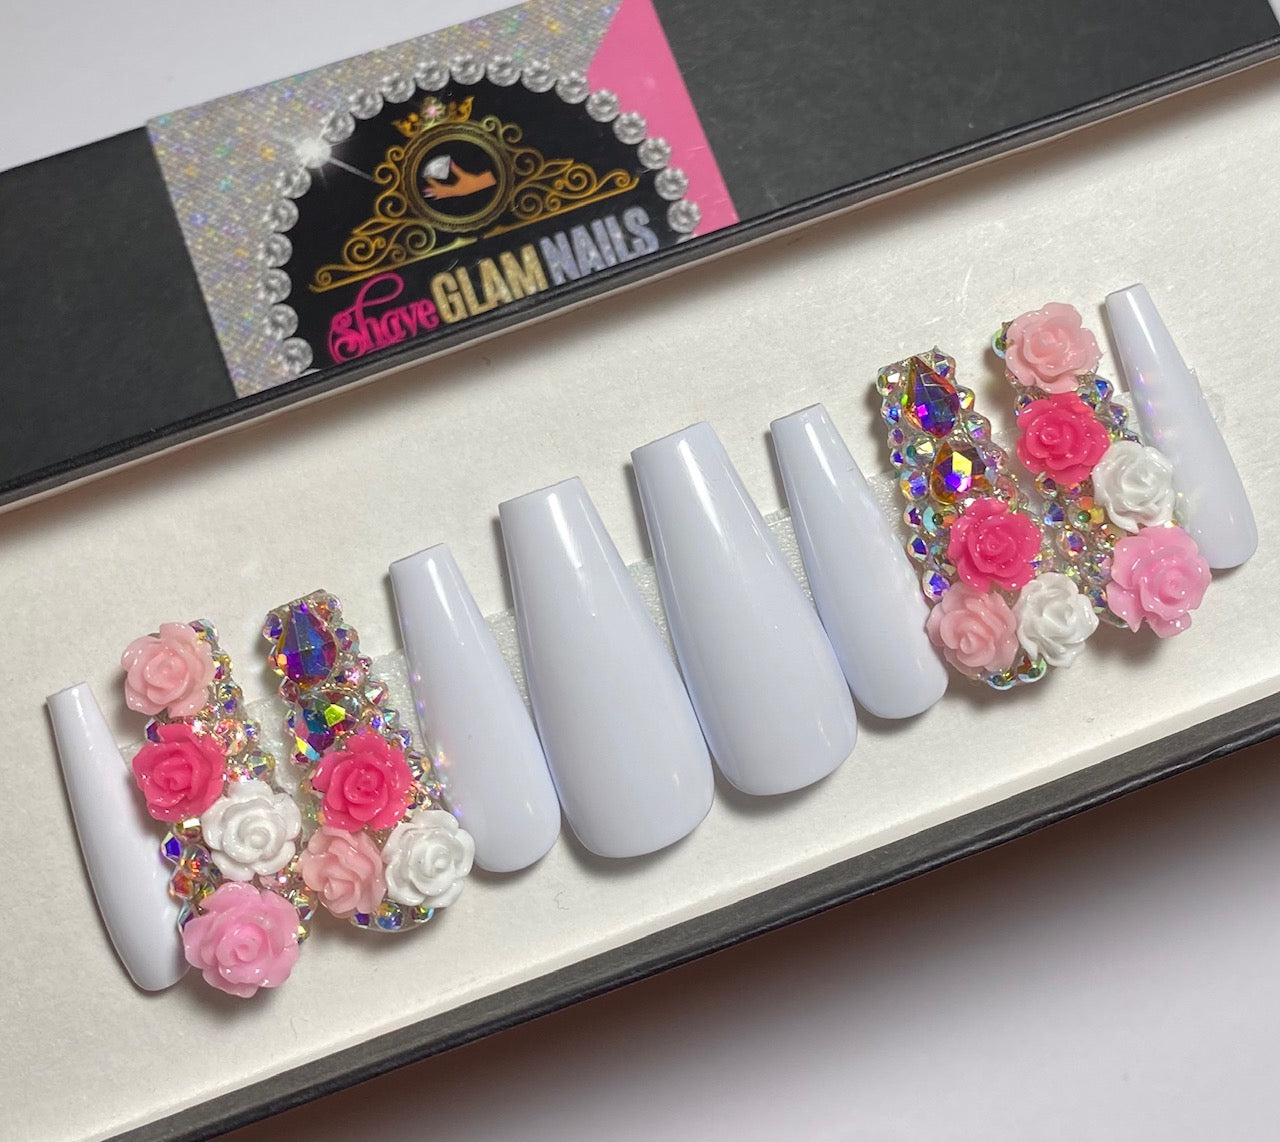 3D Flower Bling Style Press On Nails